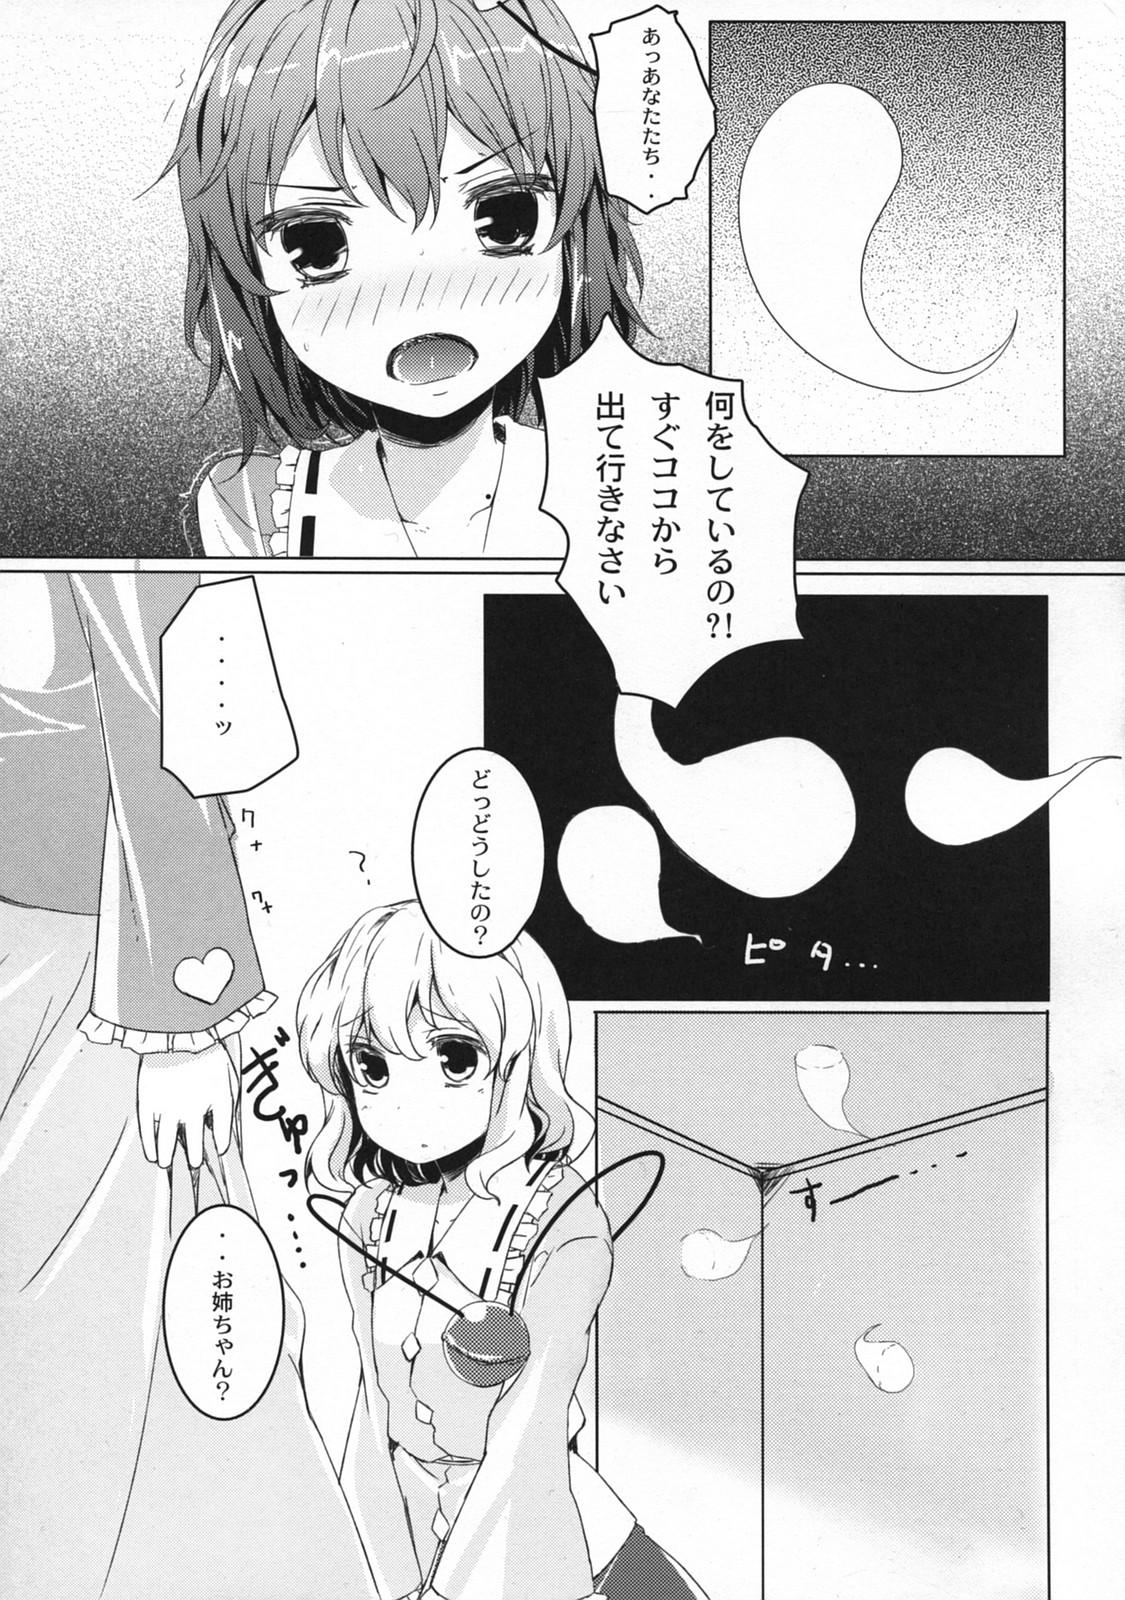 Toys BABY BAD DREAM - Touhou project Real Amateurs - Page 8